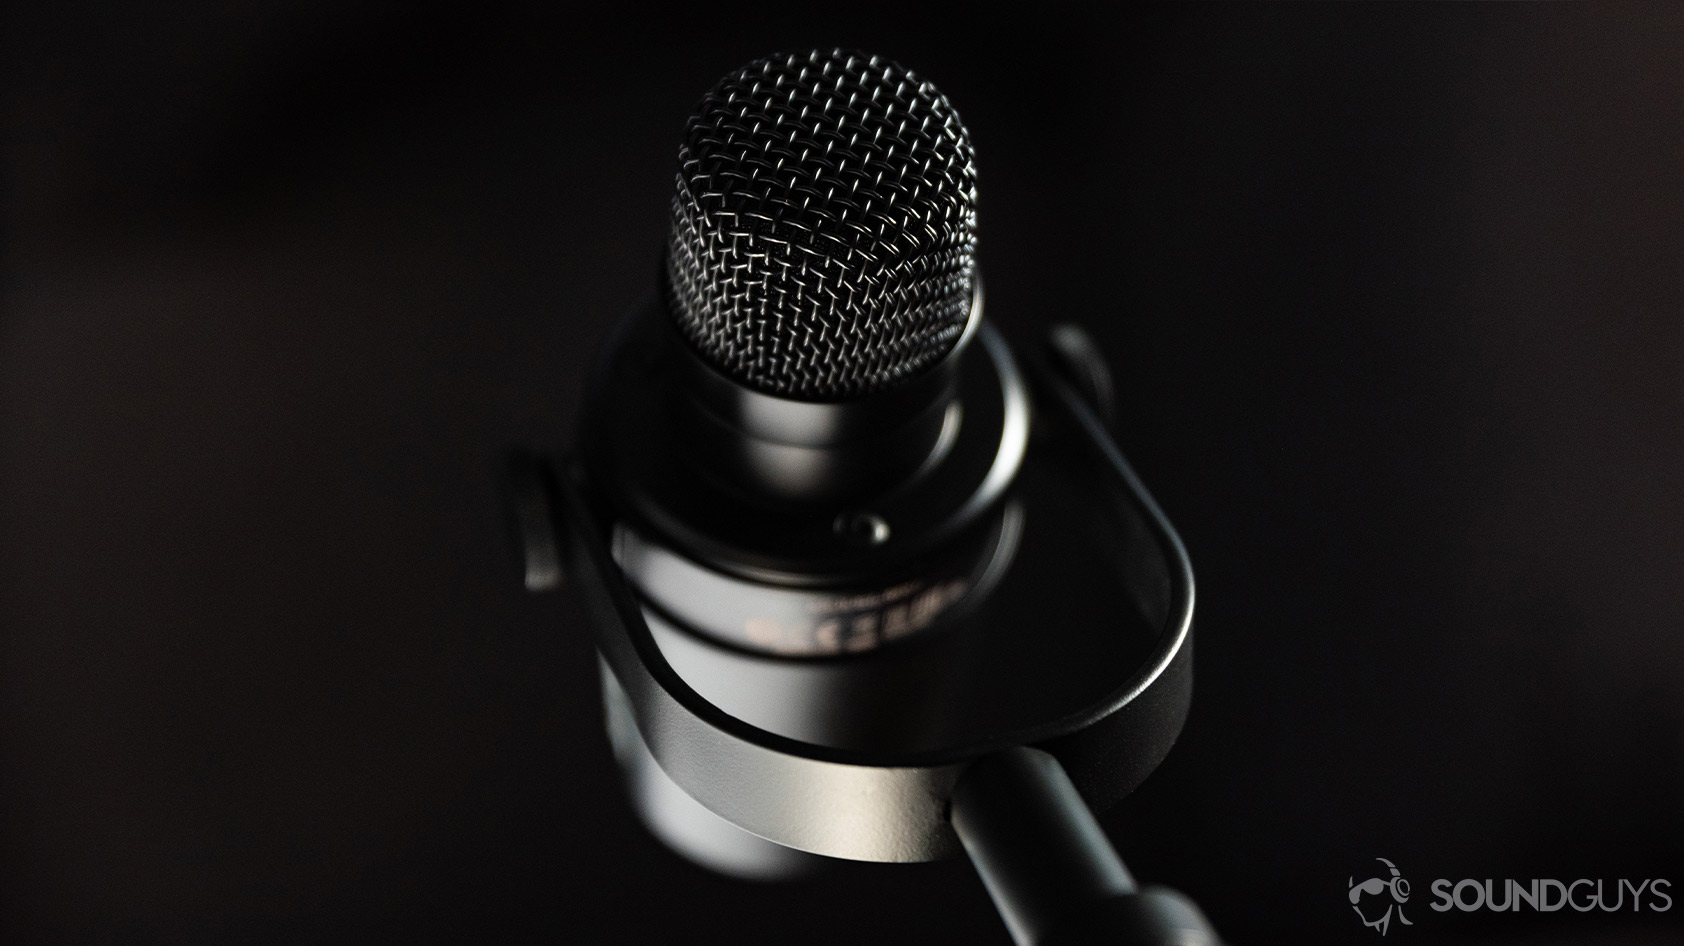 The Shure MV7 USB microphone without the windscreen installed to reveal the recording capsule.